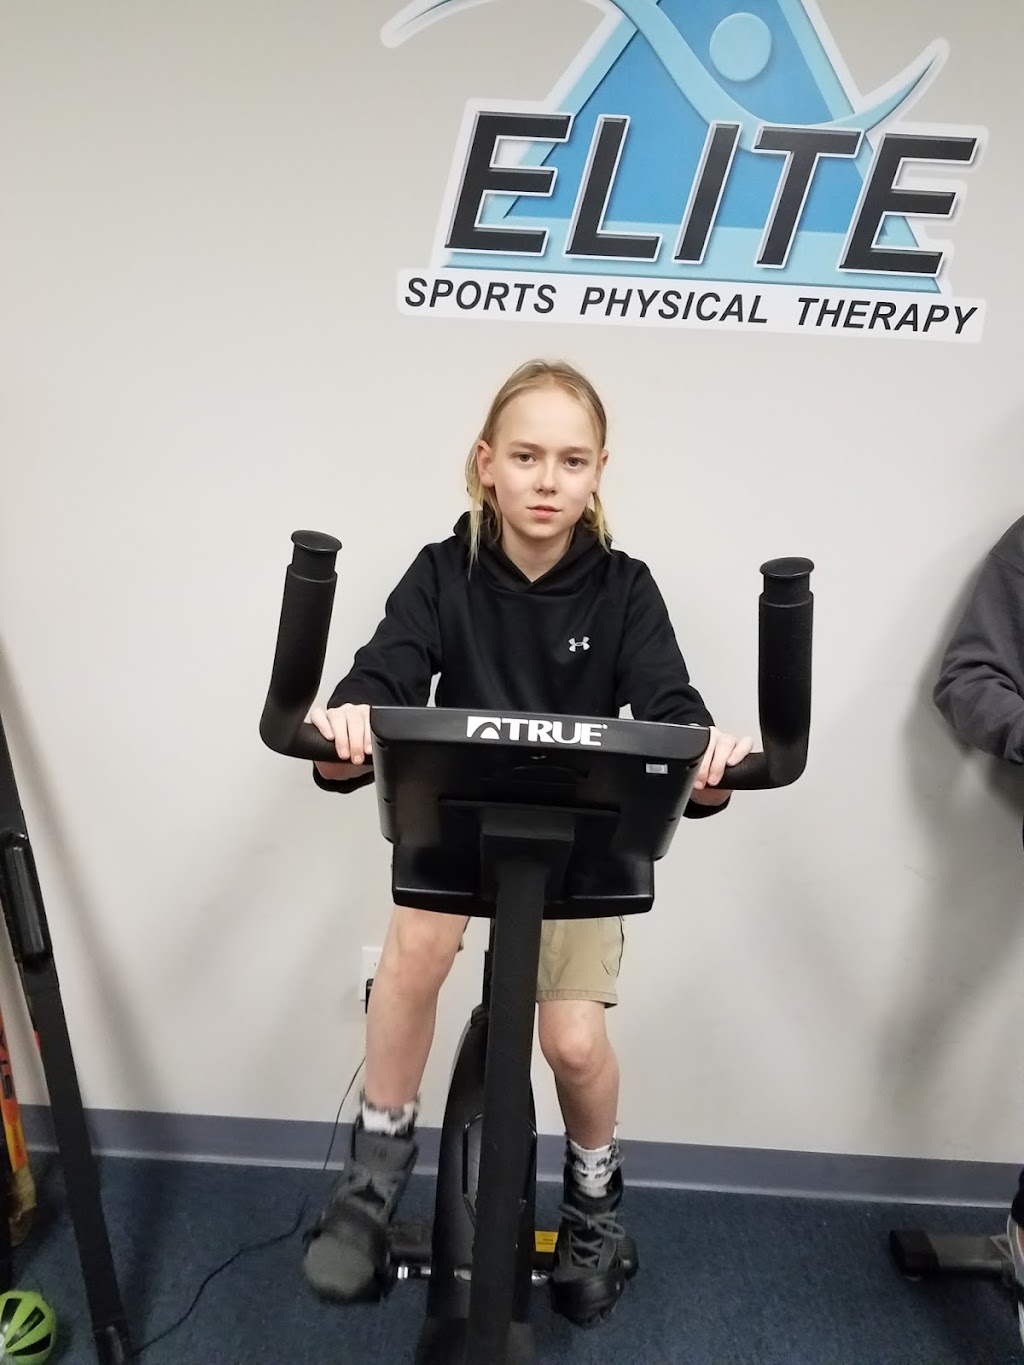 Elite Sports Physical Therapy | 1540 W Park Ave, Tinton Falls, NJ 07712 | Phone: (732) 544-0011